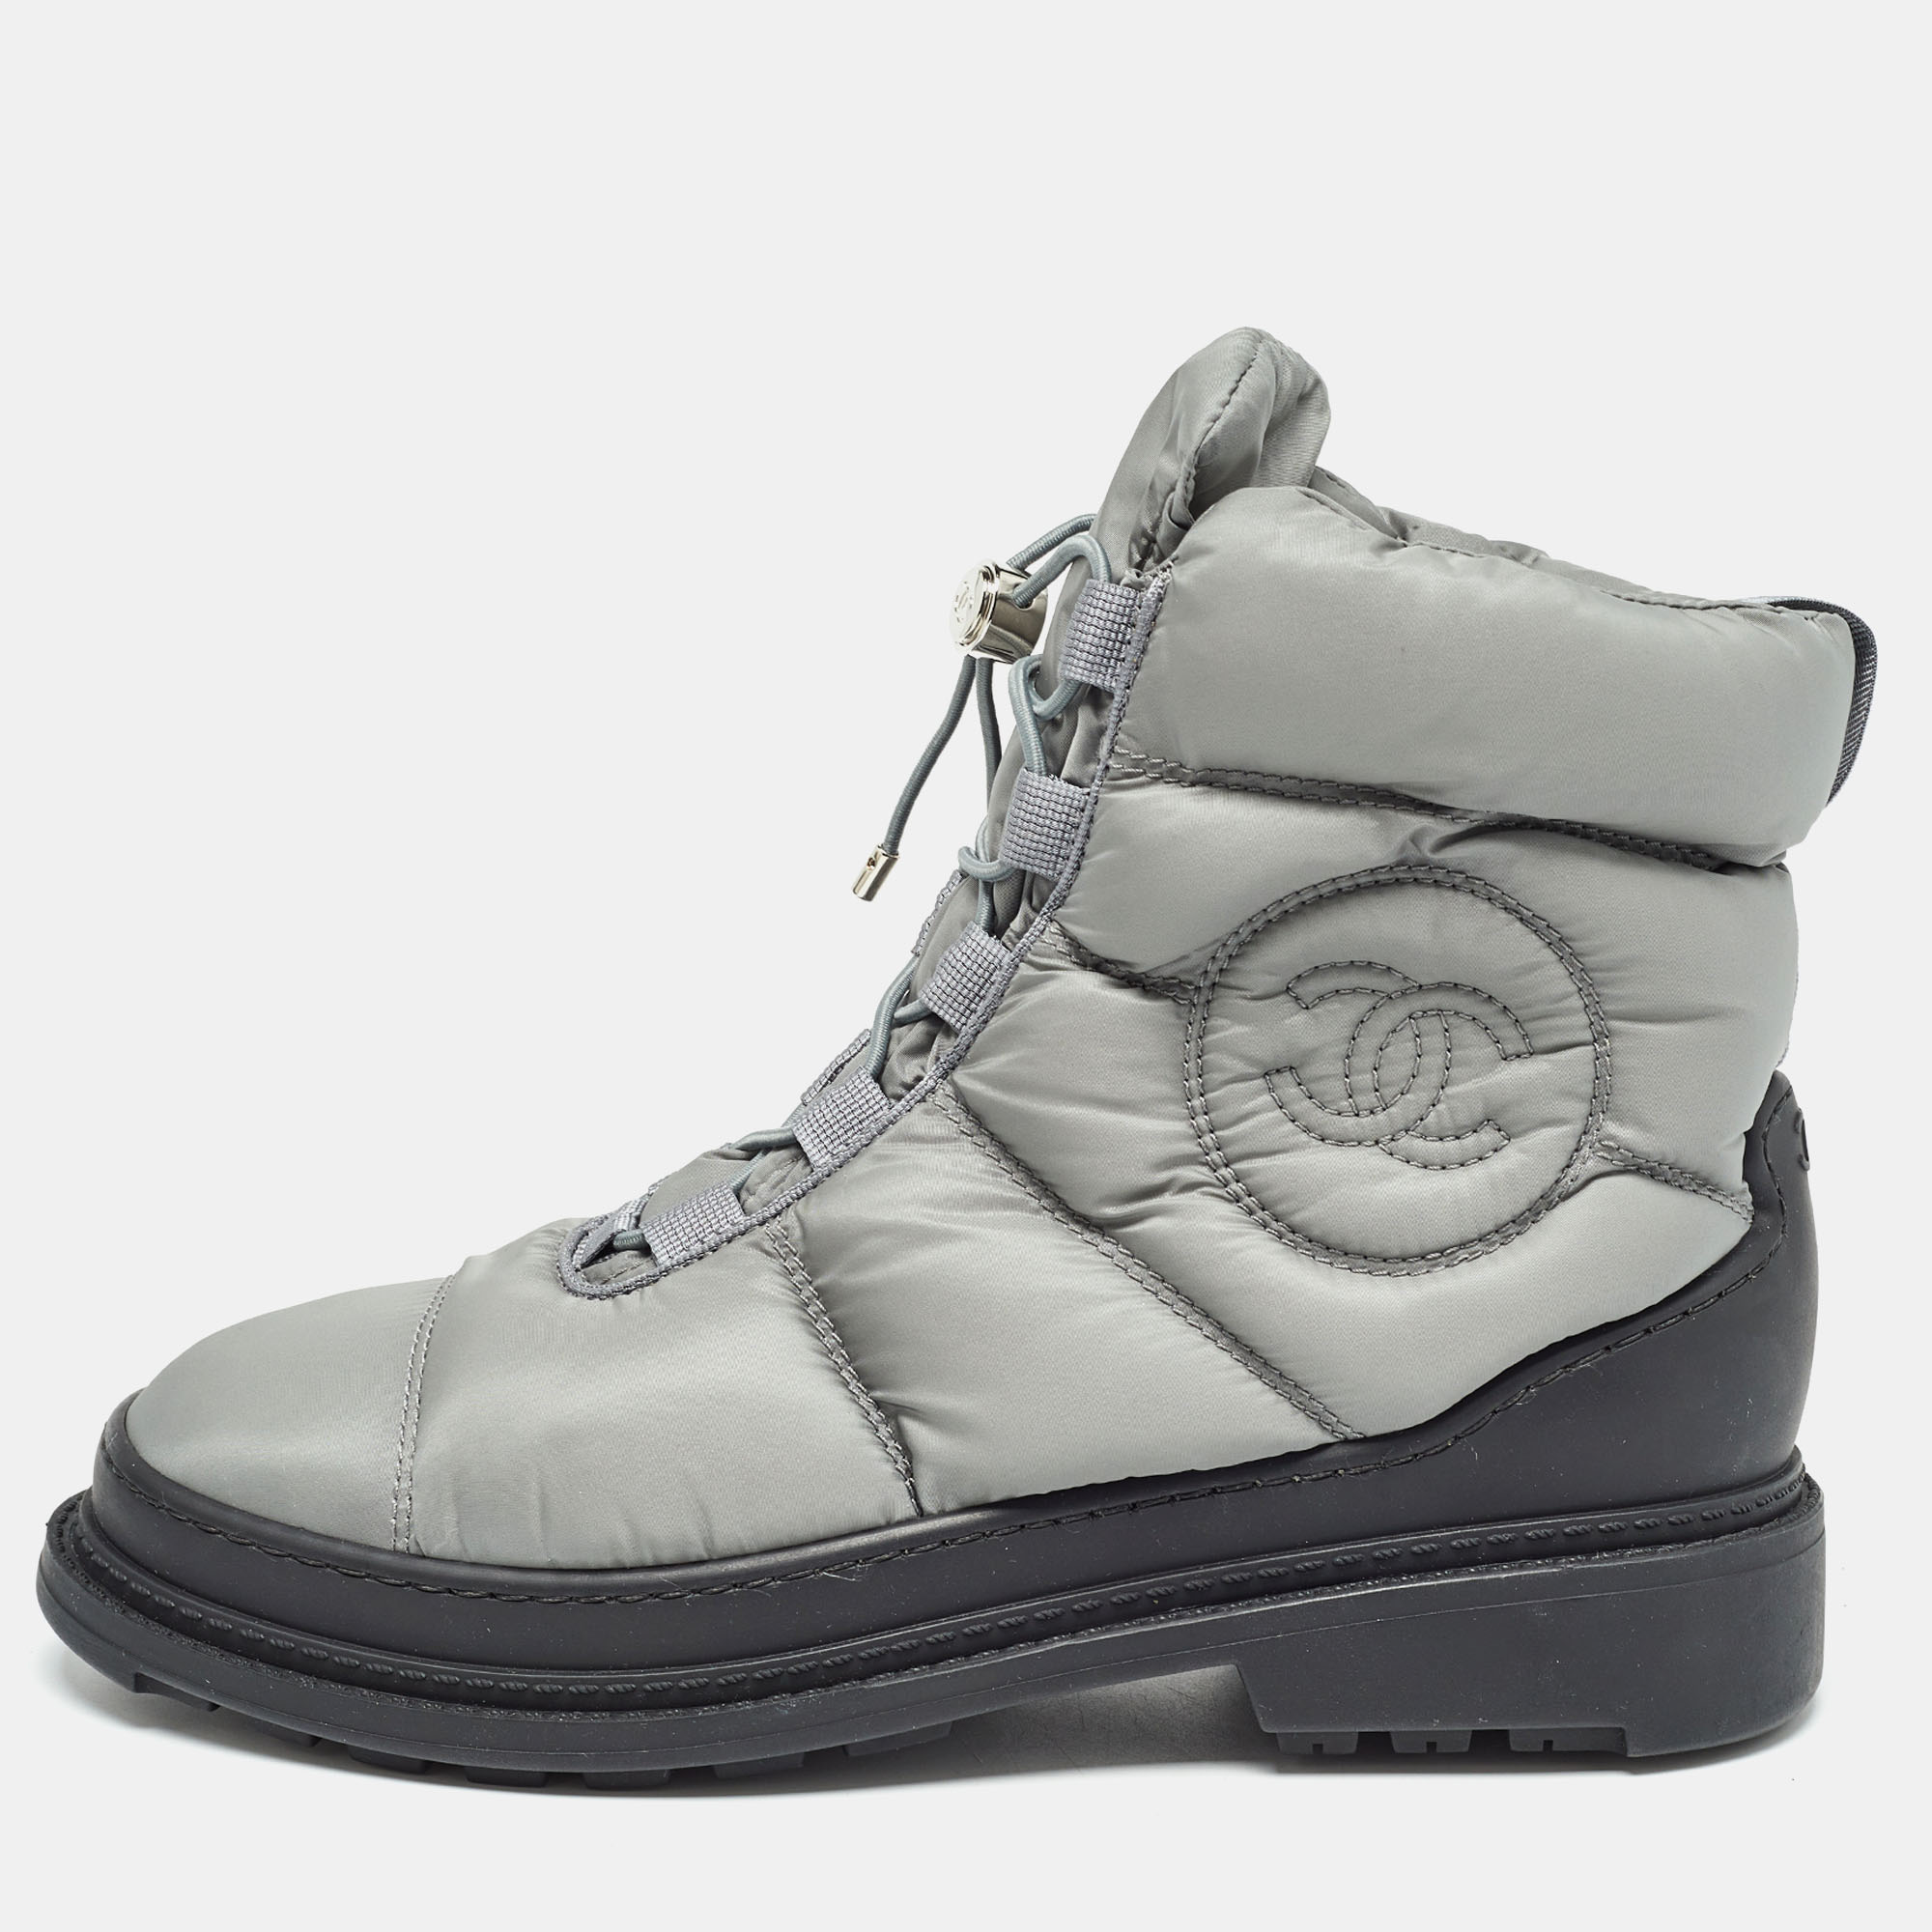 Chanel grey nylon snow ankle boots size 37.5